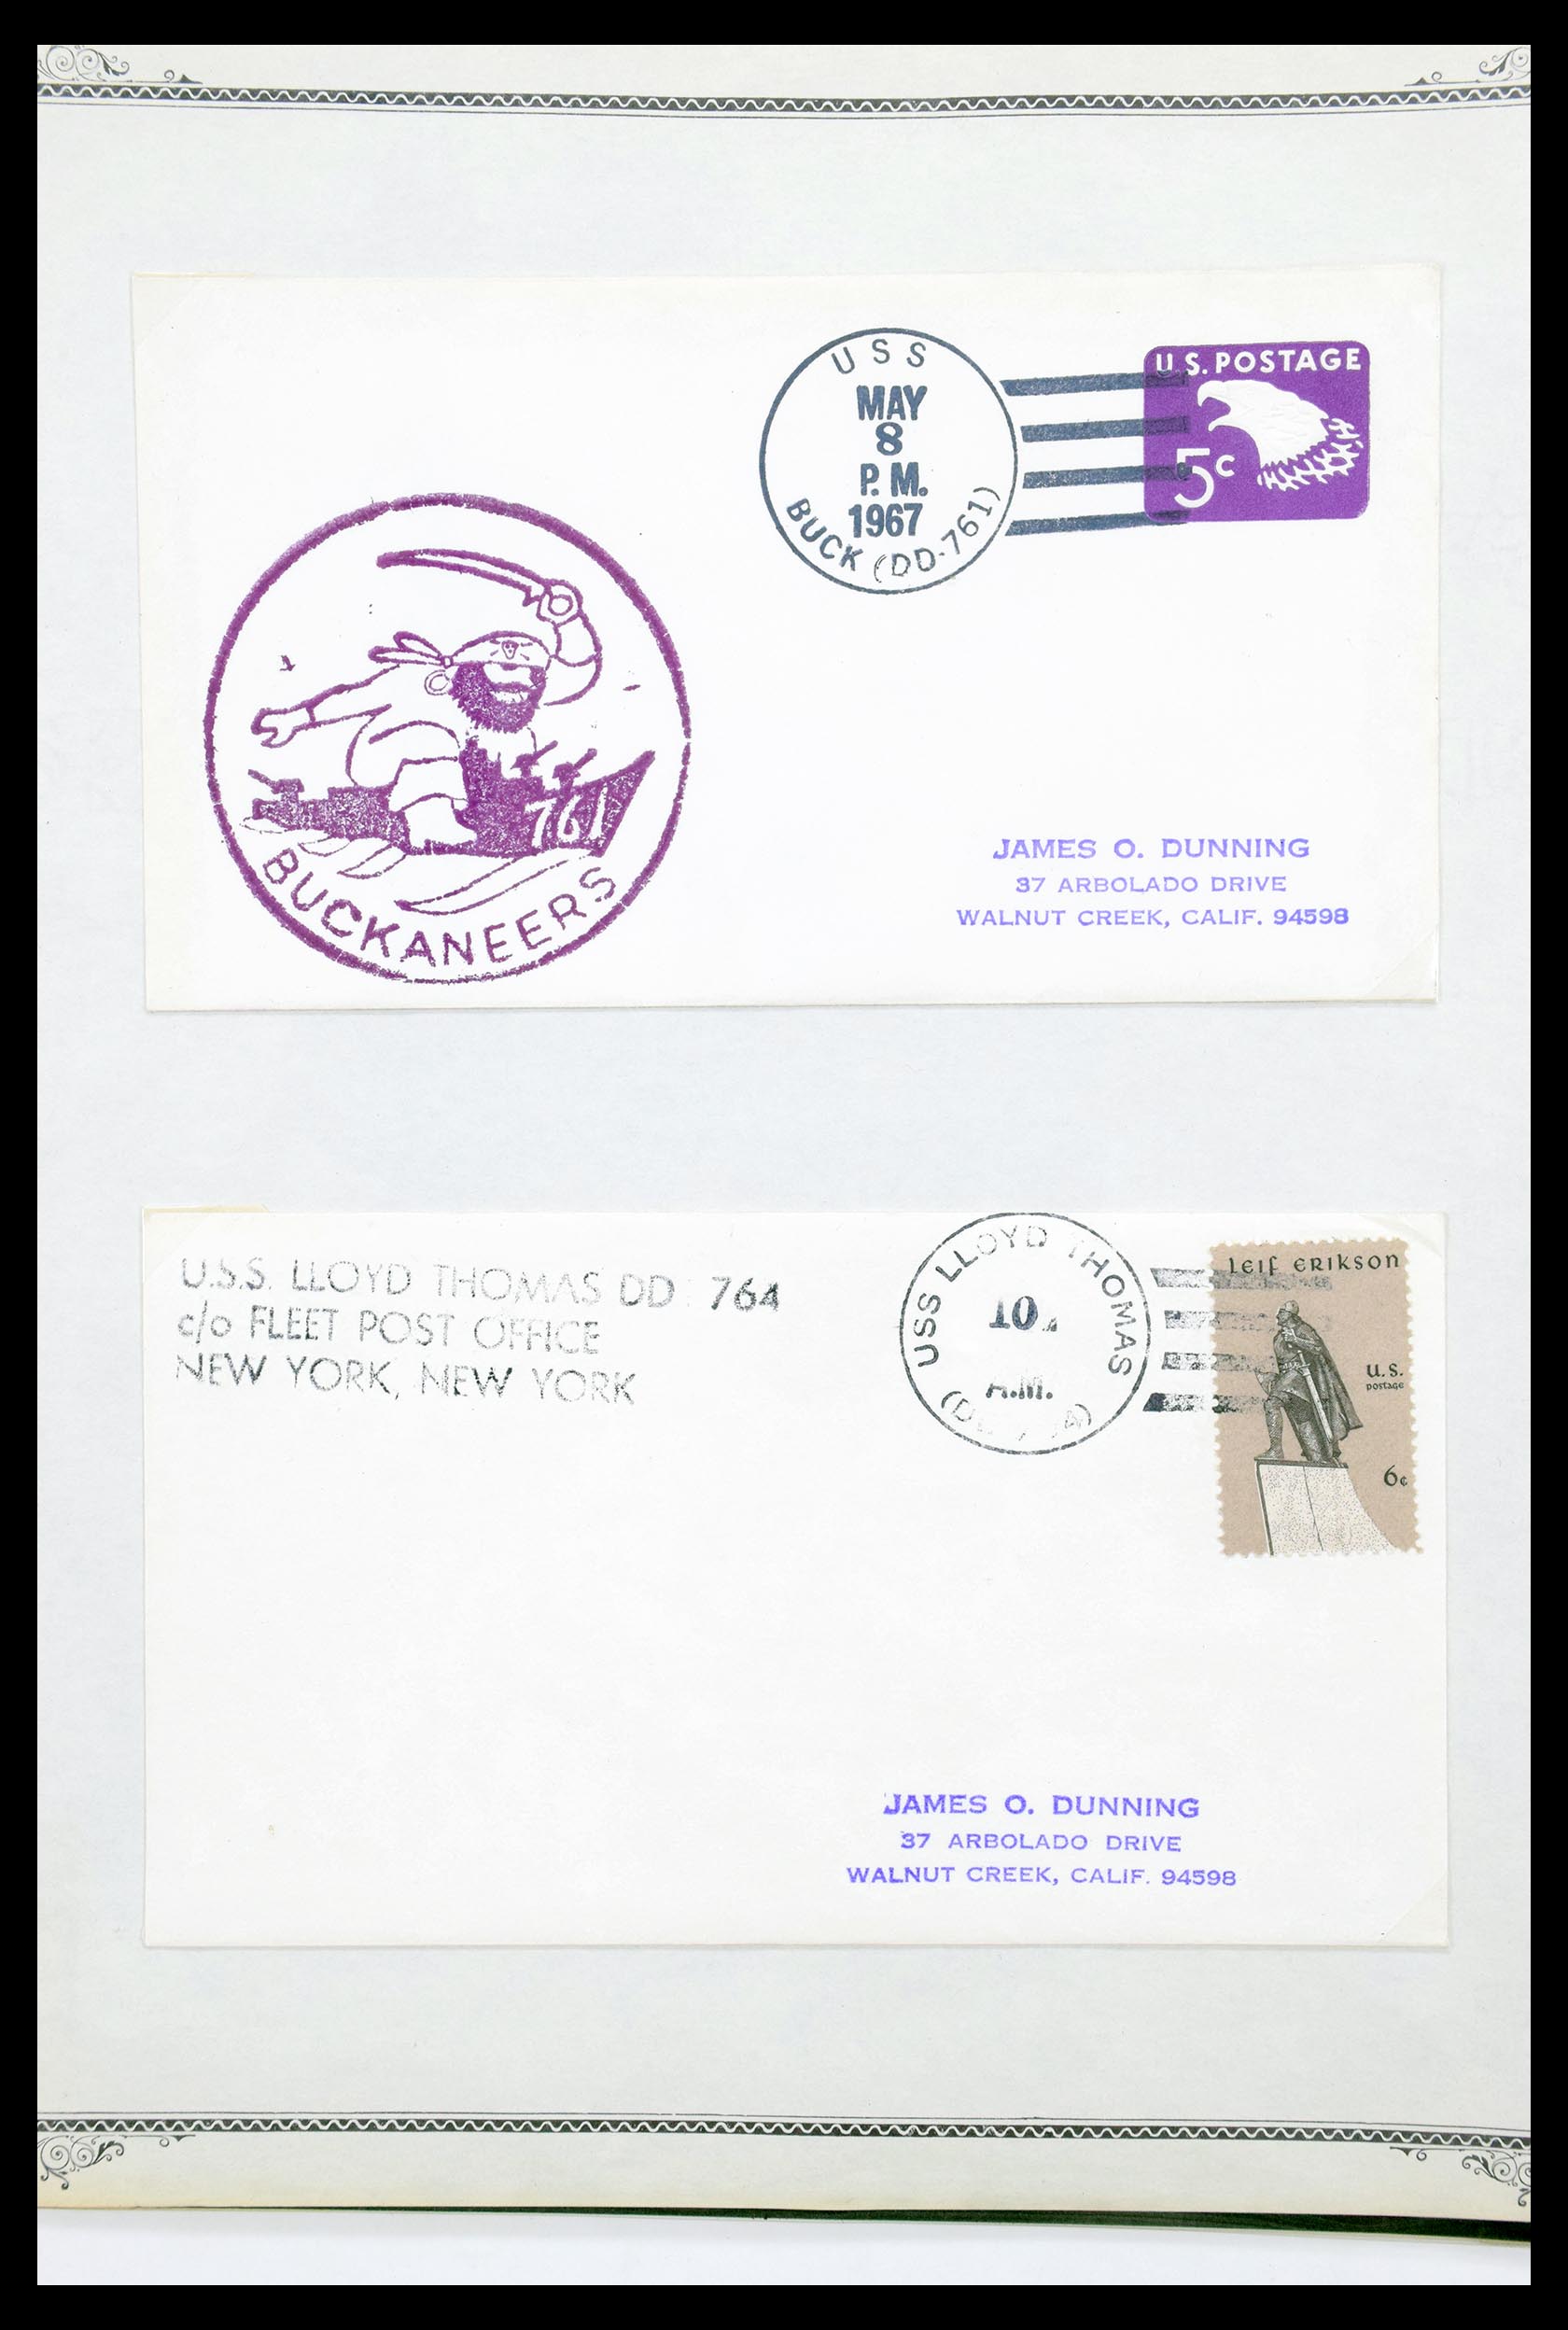 30341 038 - 30341 USA naval cover collection 1930-1970.